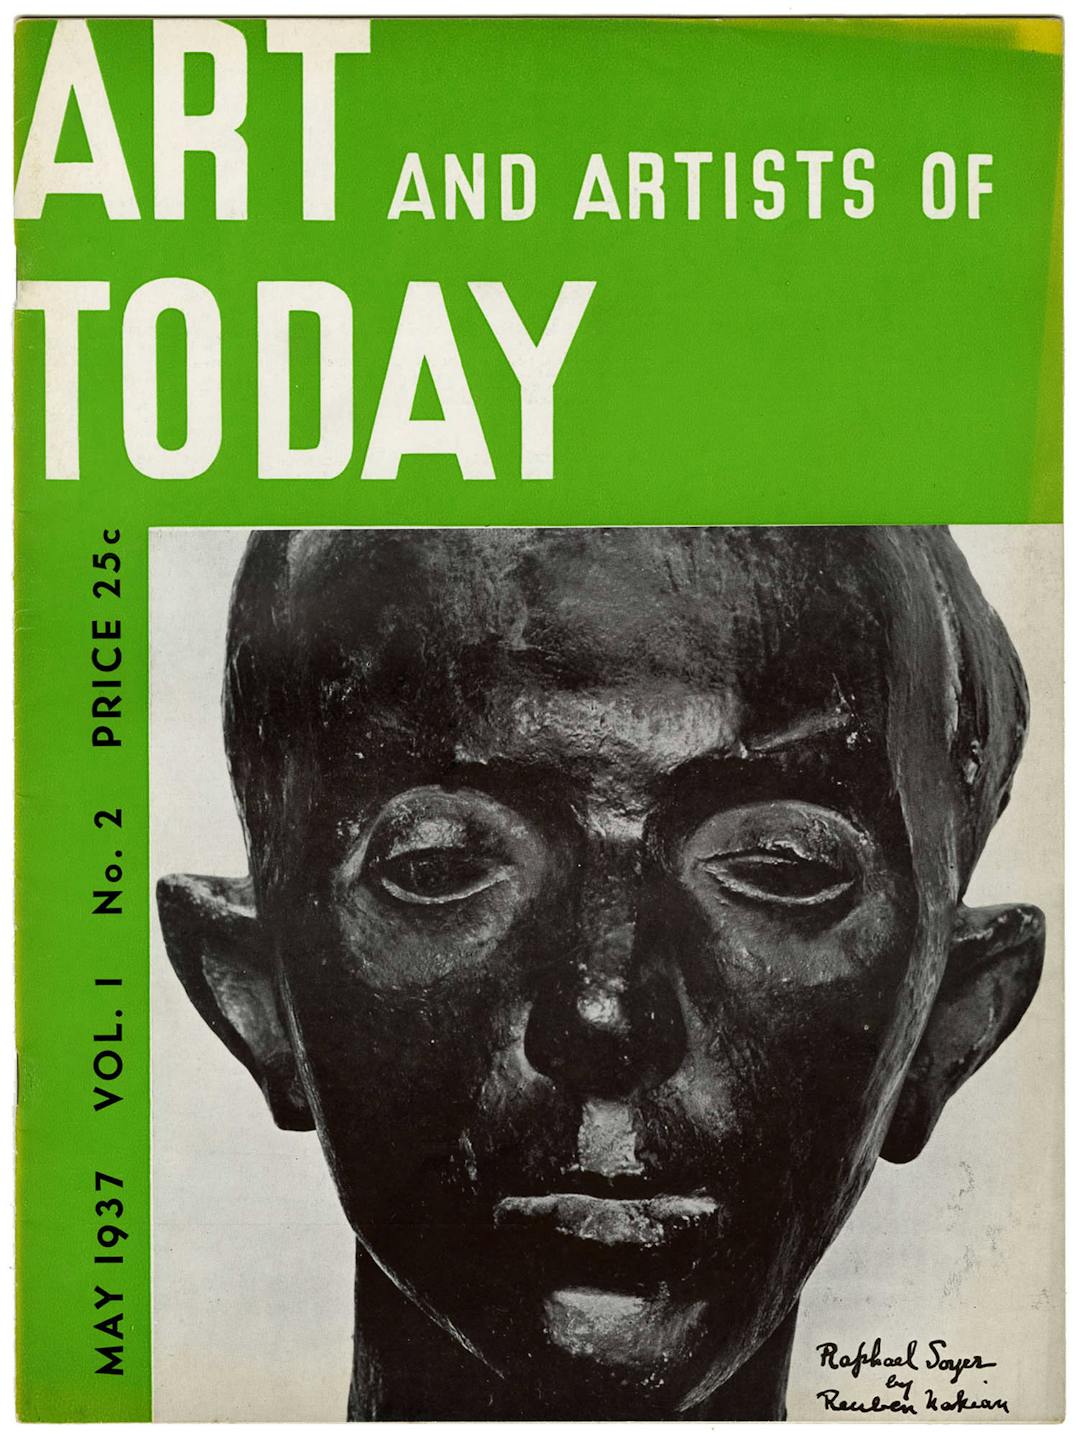 Art and Artists of Today, Vol. 1 no. 2, May 1937 – The Richard Pousette-Dart Foundation